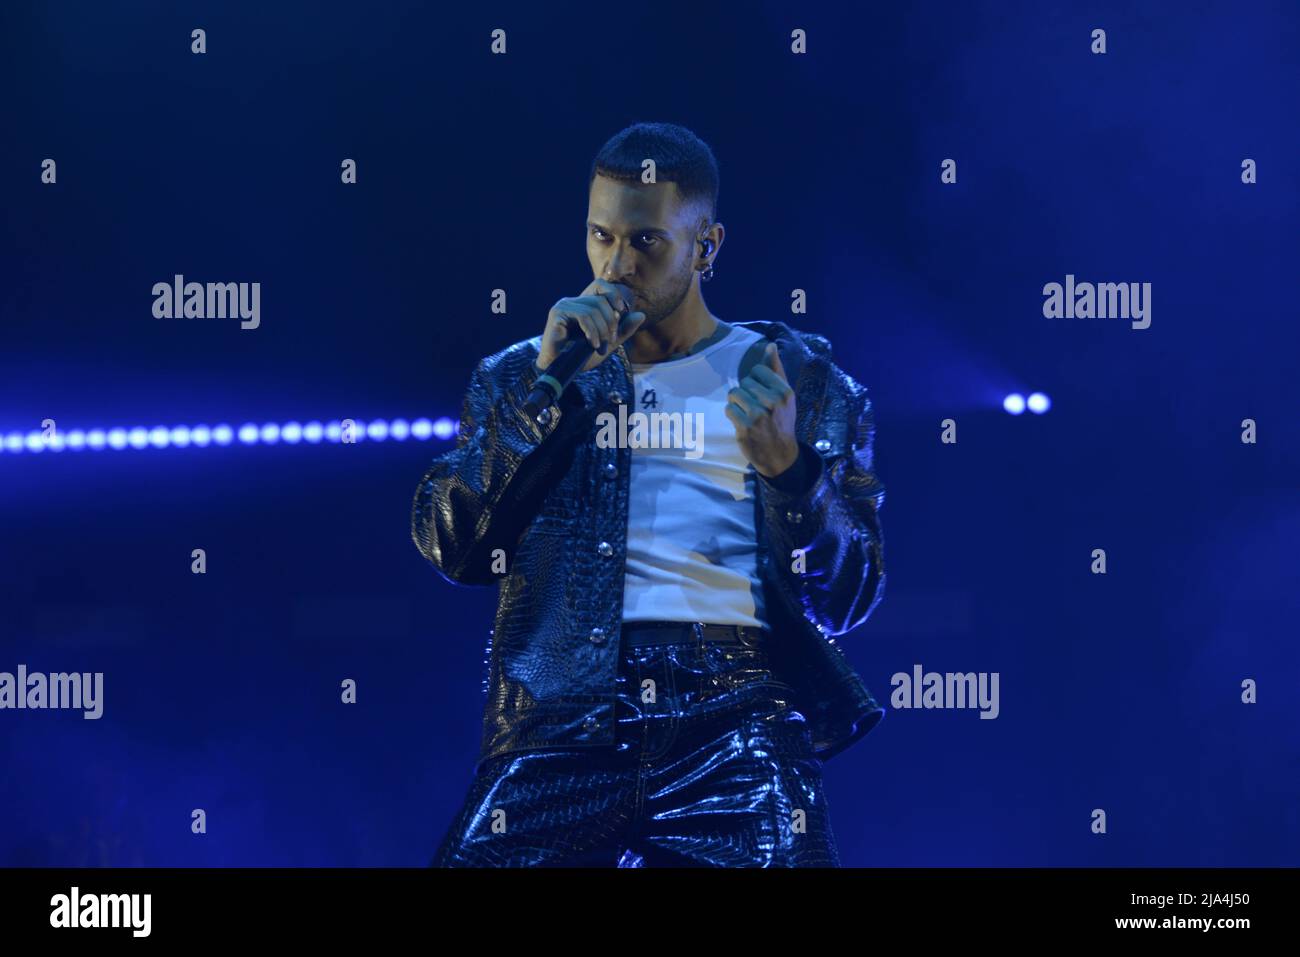 Padua, Italy, 25/05/2022, Alessandro Mahmoud, known professionally as Mahmood, is an Italian singer-songwriter. He rose to prominence after competing on the sixth season of the Italian version of The X Factor. He has won the Sanremo Music Festival twice, in 2019 with the song "Soldi" and in 2022 alongside Blanco with the song "Brividi". His Sanremo victories allowed him to represent Italy at the Eurovision Song Contest in those respective years, finishing in second place in 2019 and in sixth place in 2022 as the host entrant.[1][2][3] Mahmood has released two studio albums, Gioventù bruciata a Stock Photo